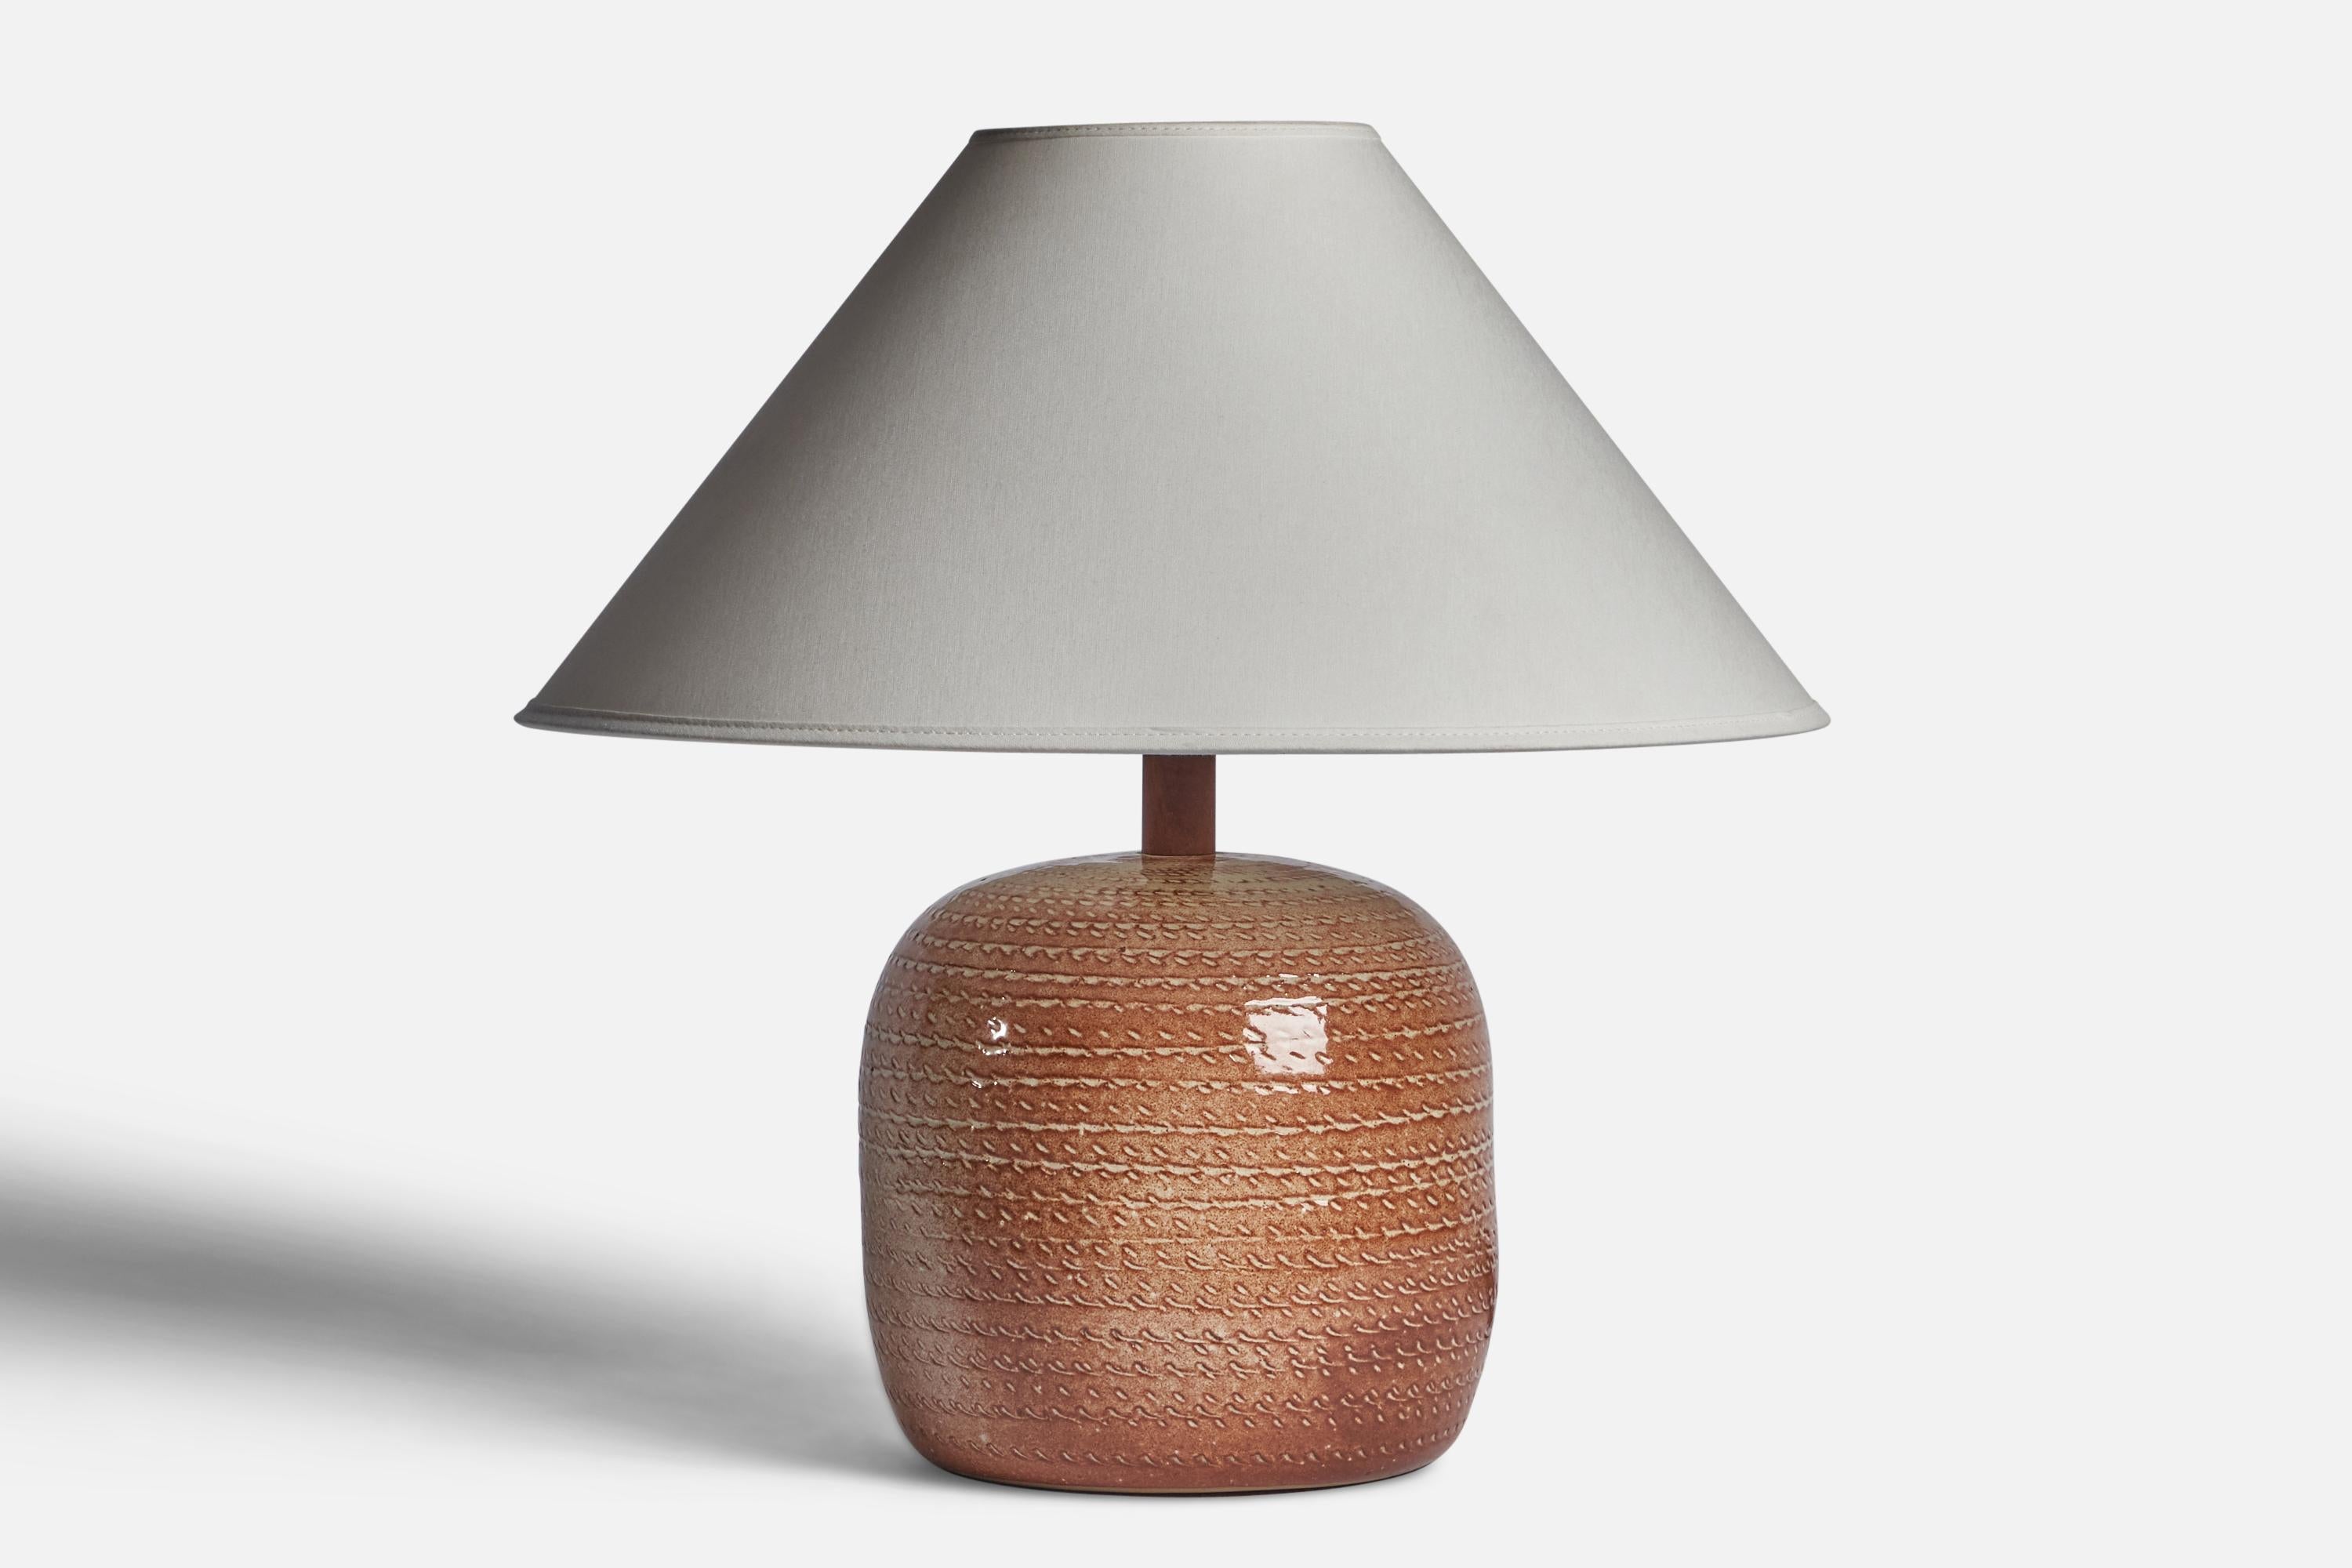 A red and beige-glazed ceramic table lamp designed by Jane & Gordon Martz and produced by Marshall Studios, USA, 1960s.

Dimensions of Lamp (inches): 12” H x 7.5” Diameter
Dimensions of Shade (inches): 4.5” Top Diameter x 16” Bottom Diameter x 7.15”